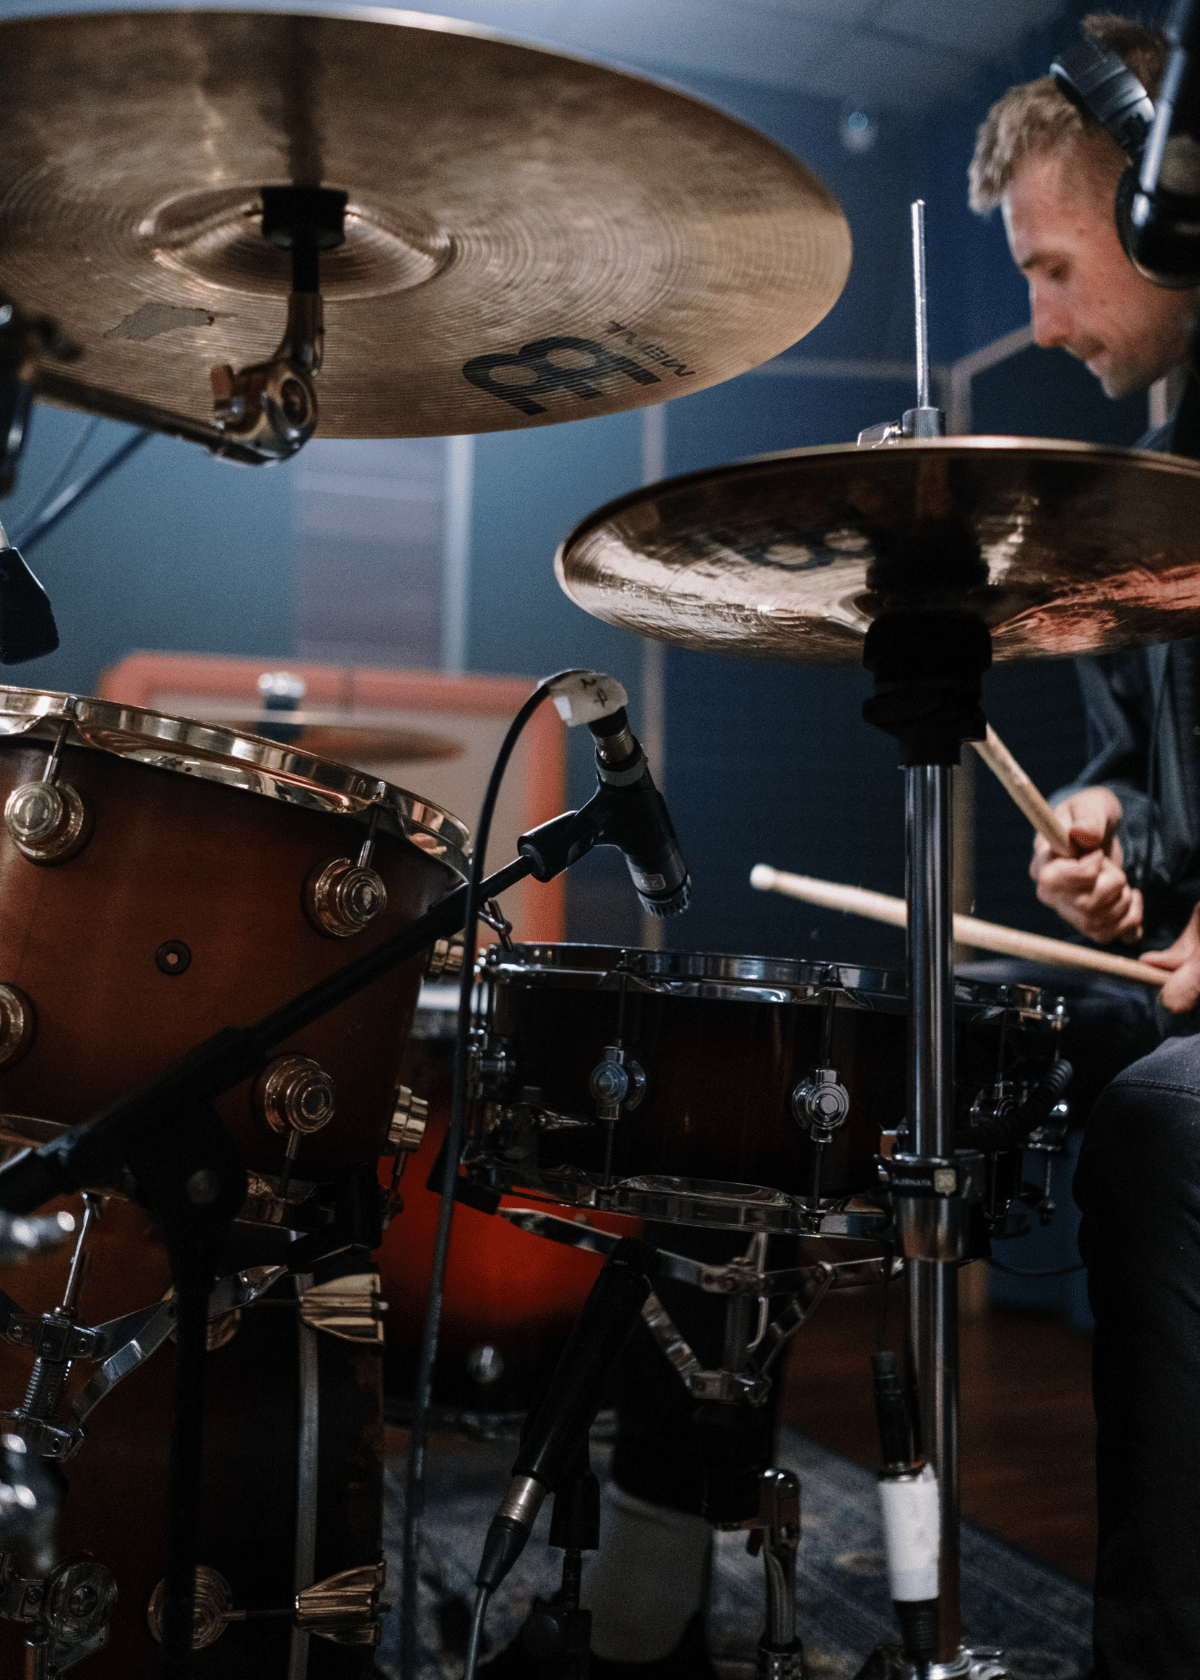 The Definitive Guide To Finding The Best Wireless Headphones For Drummers